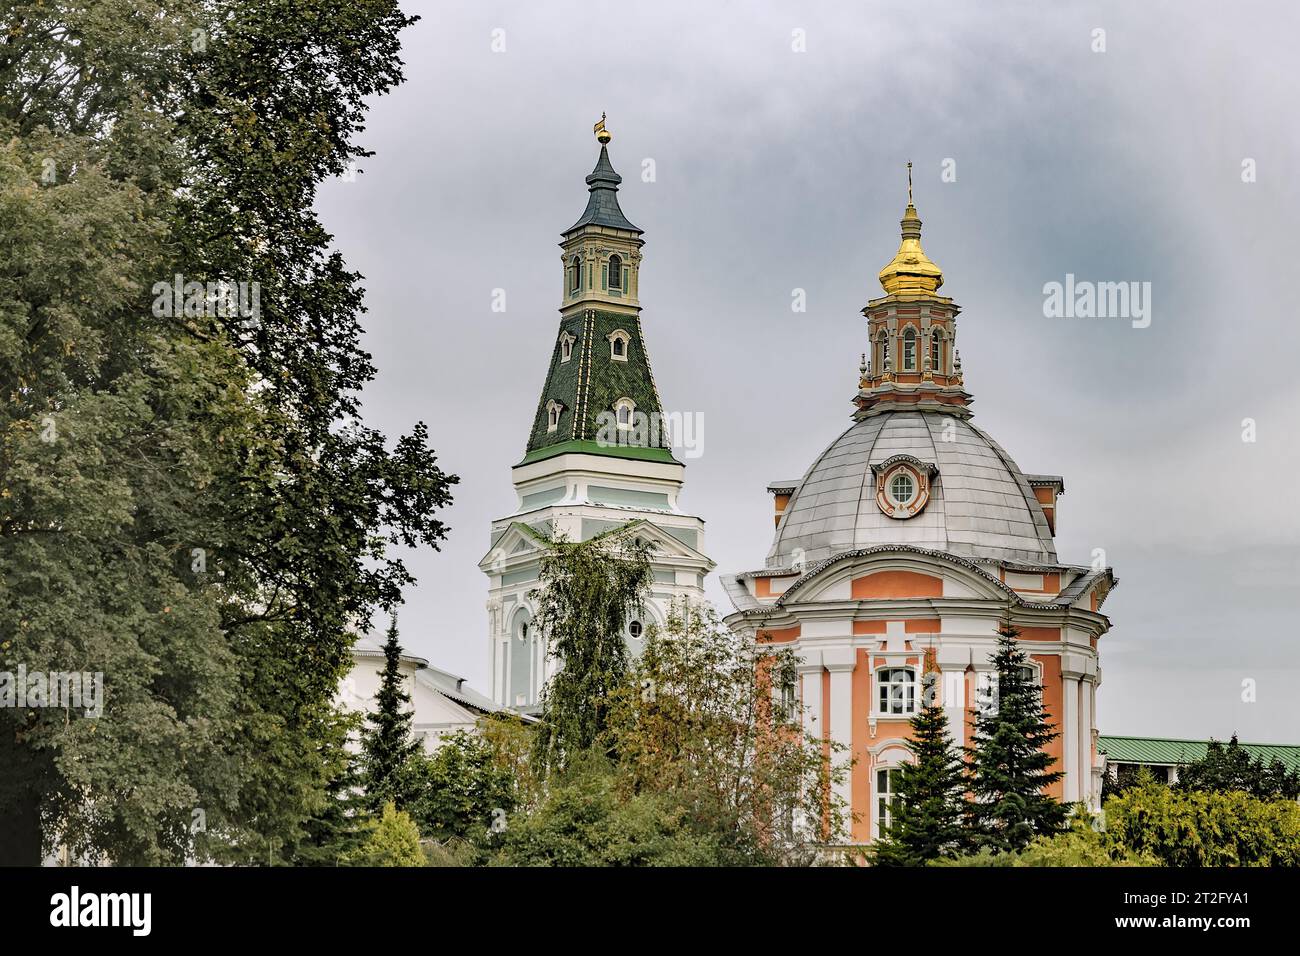 The church of the Virgin of Smolensk and Kalich Tower. Trinity Lavra of St. Sergius. Russia Stock Photo